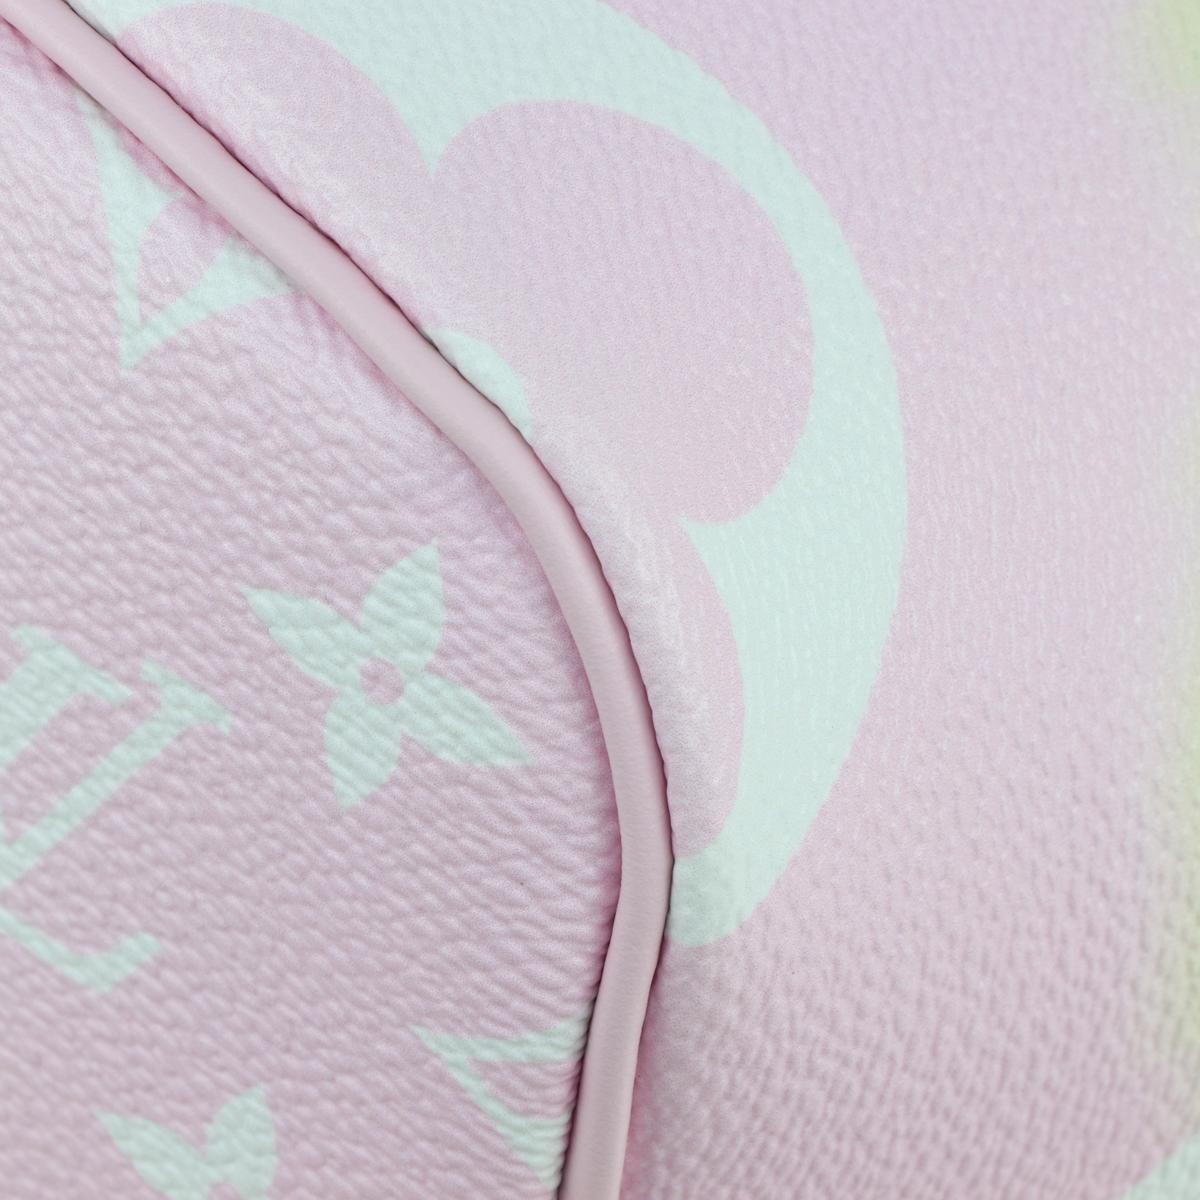 Louis Vuitton Escale Neverfull MM Bag in Pastel 2020 Limited Edition For Sale 3